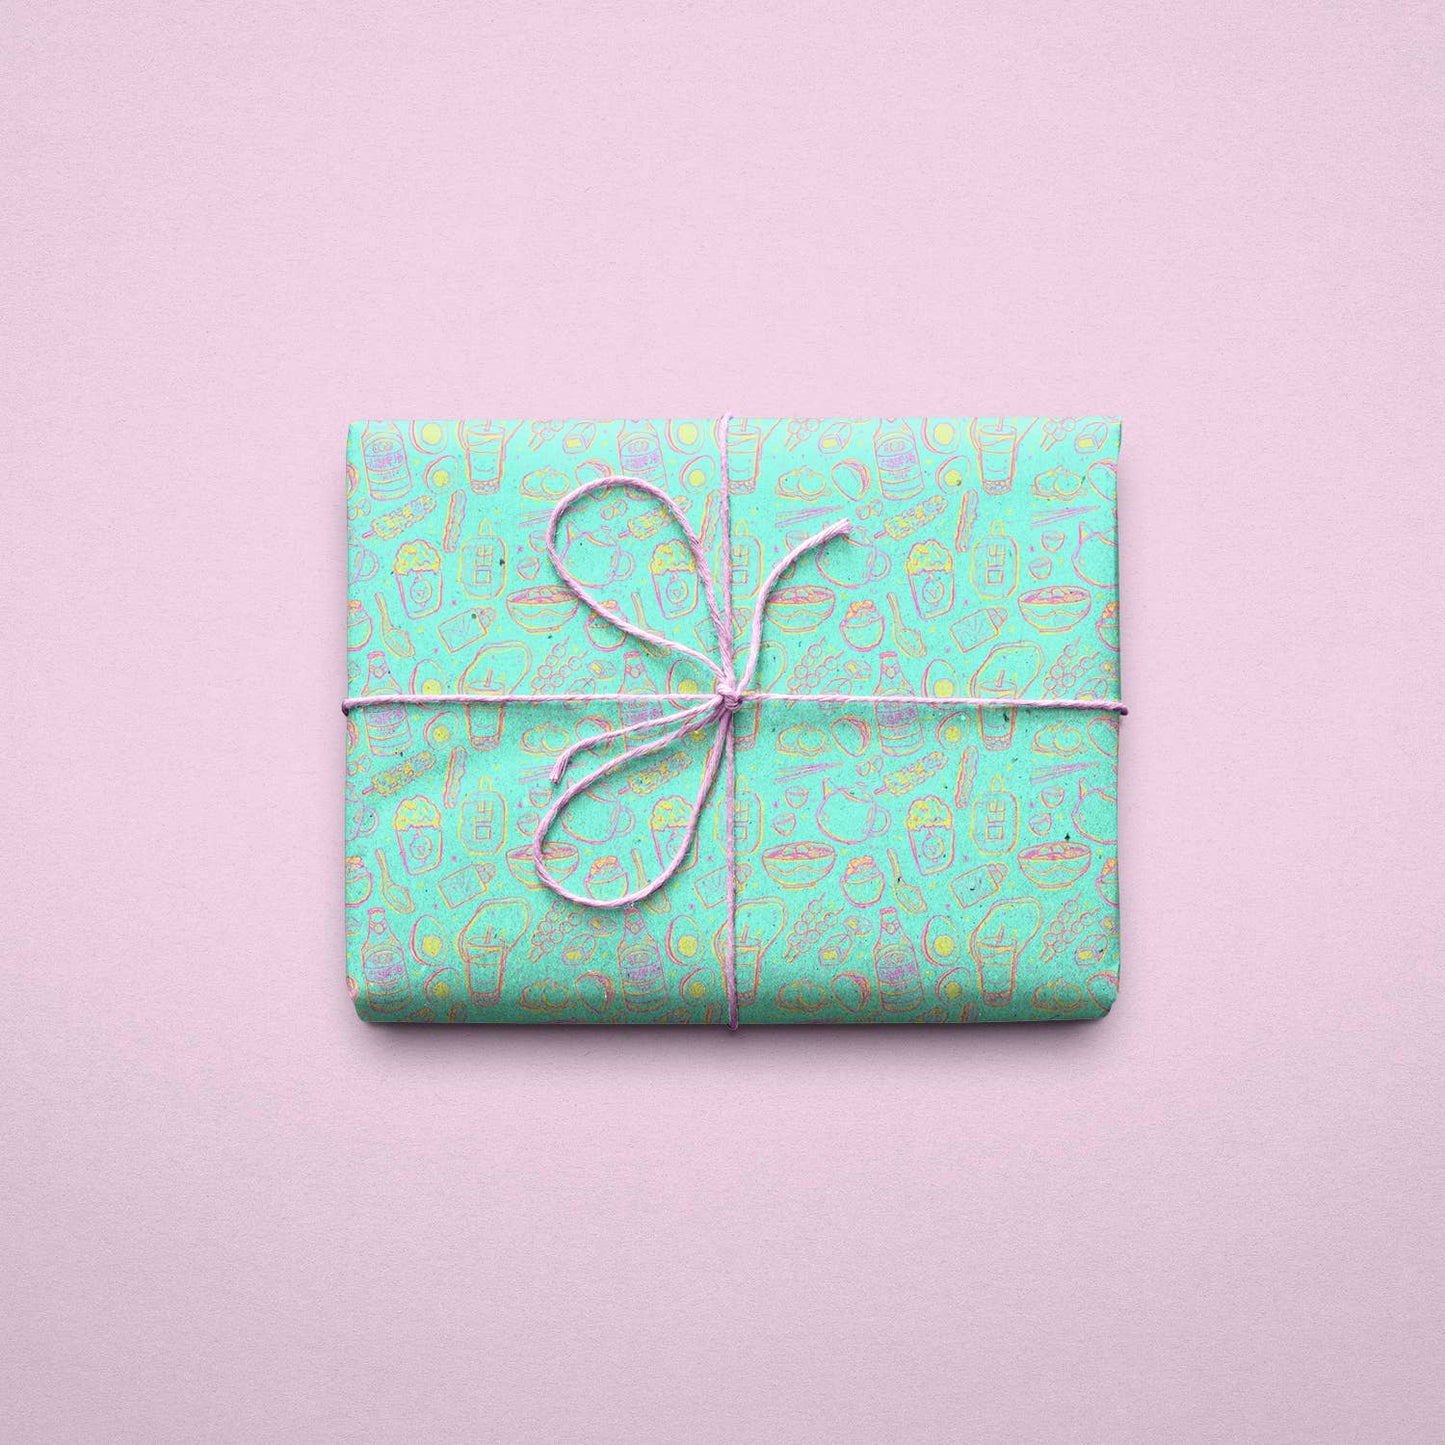 Taiwan Bites Wrapping Paper Sheets